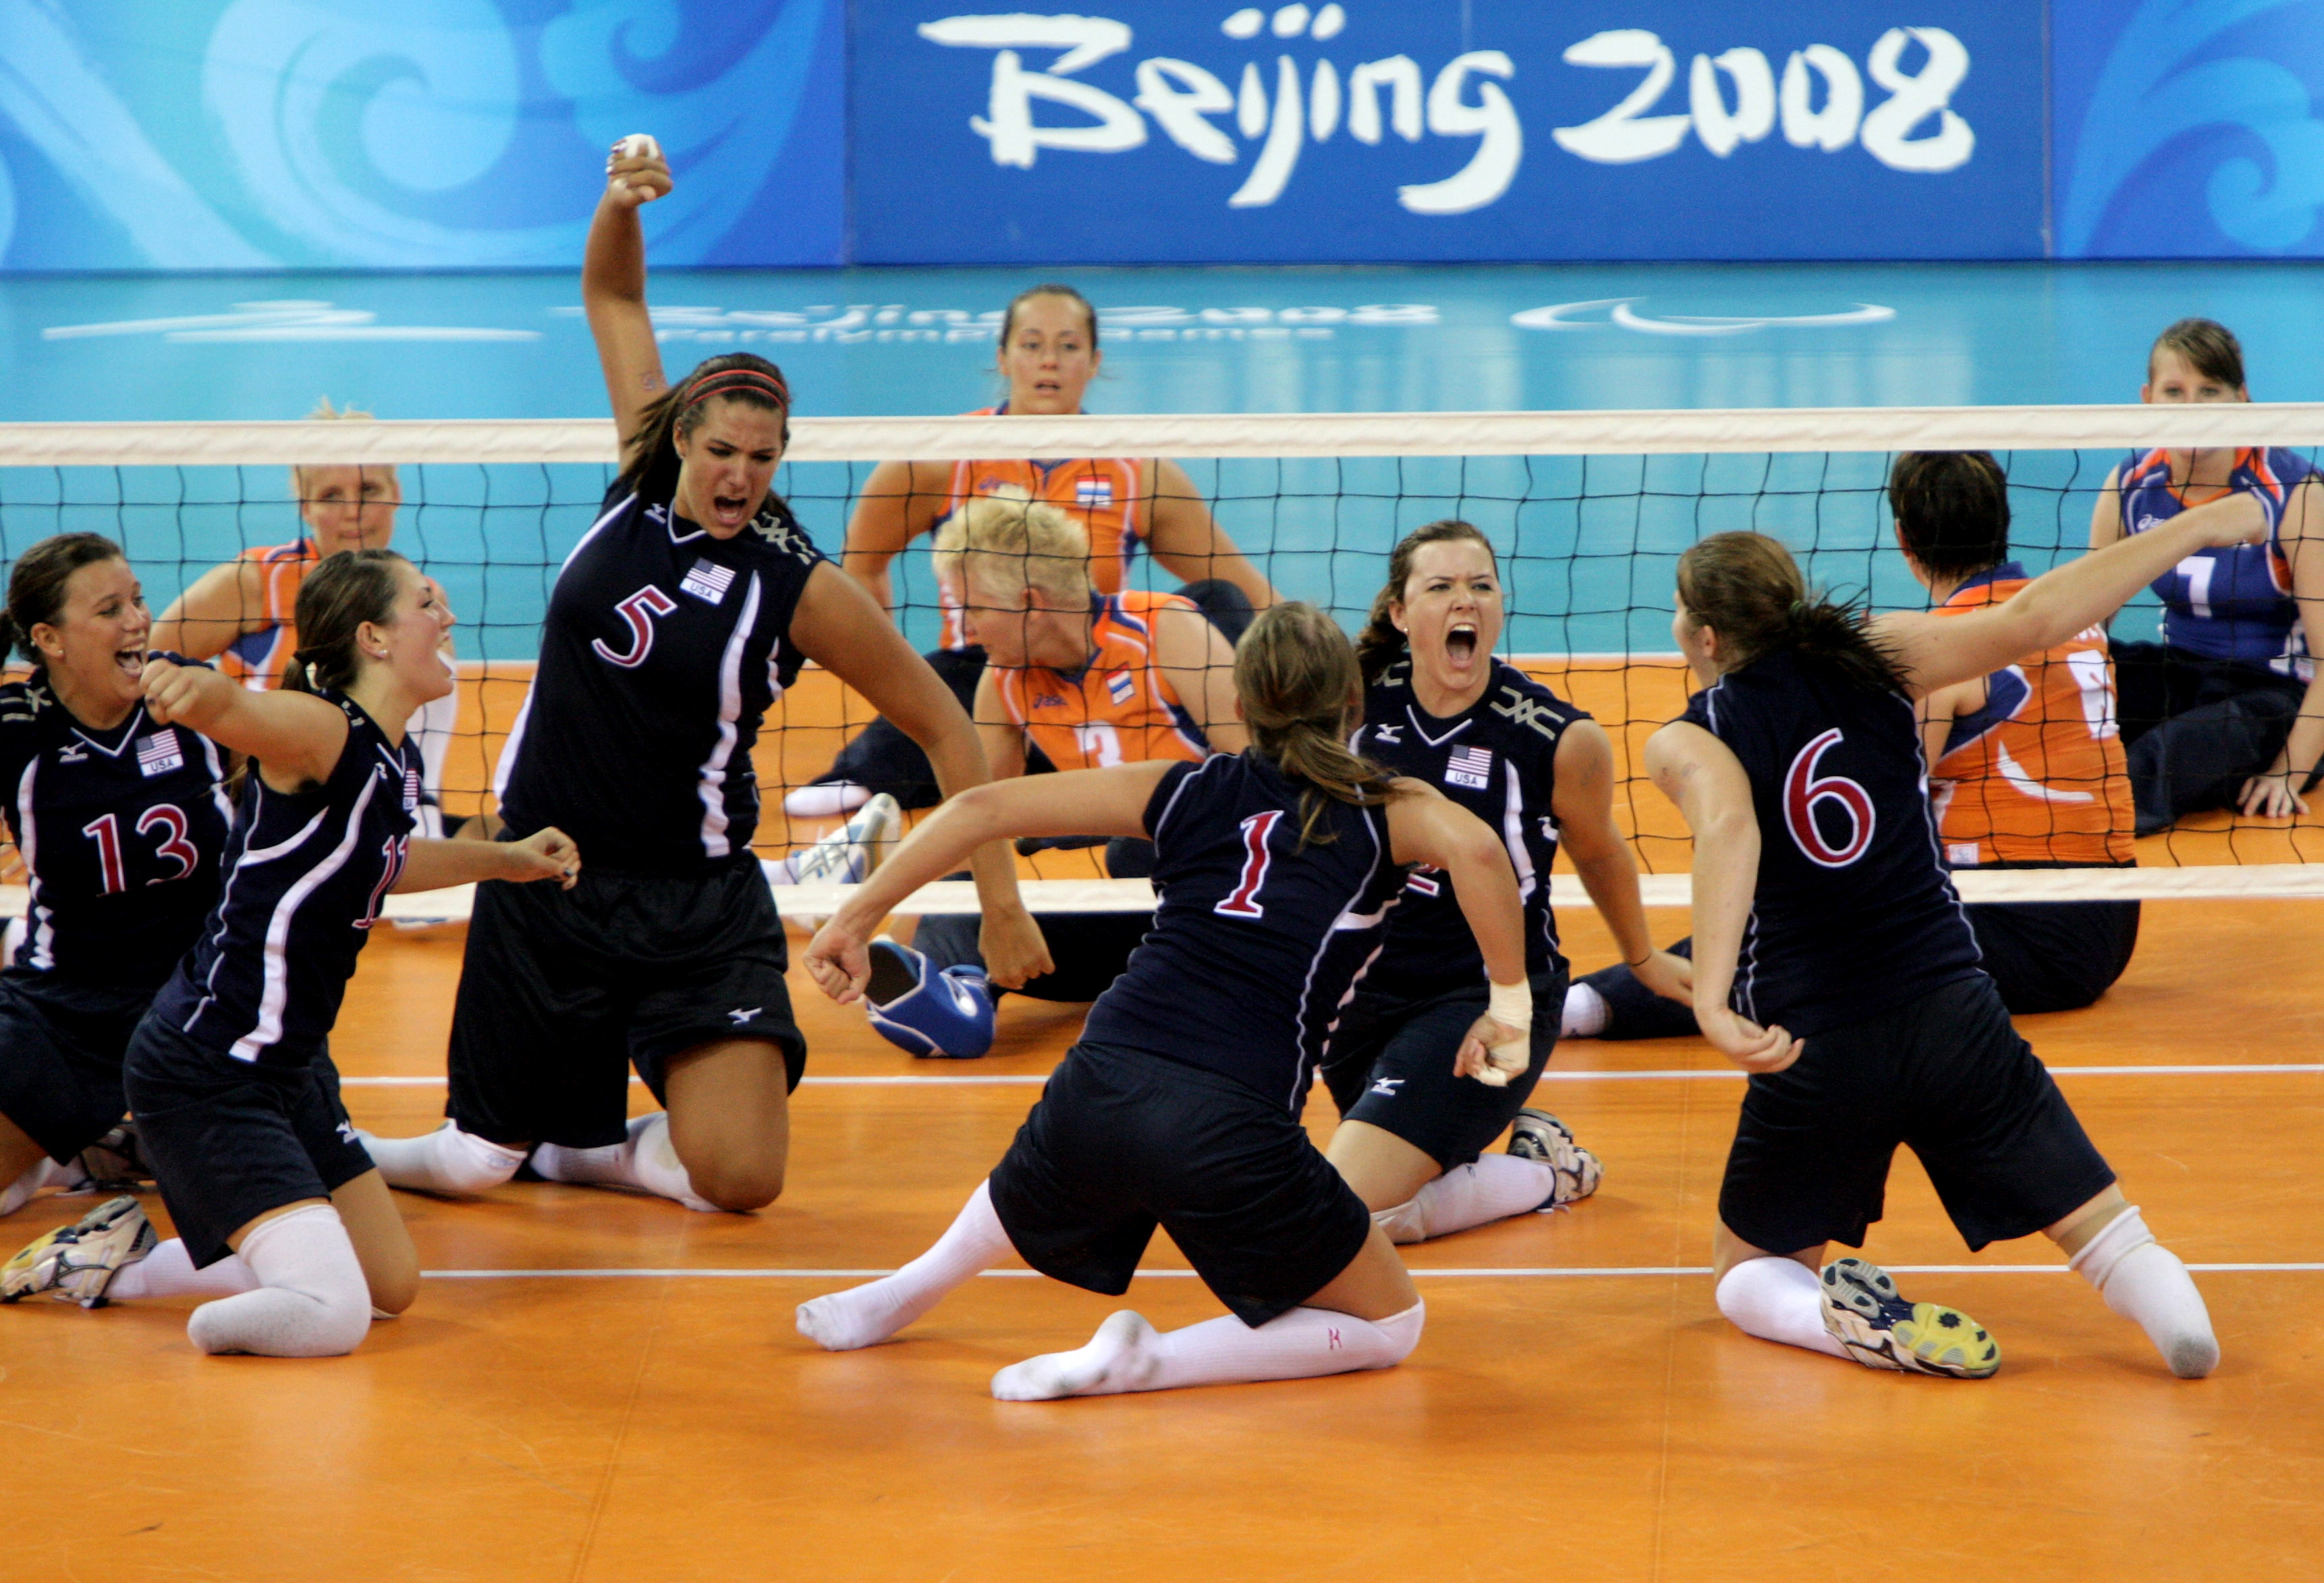 USA Sitting Volleyball Aims to be World's Best | International ...